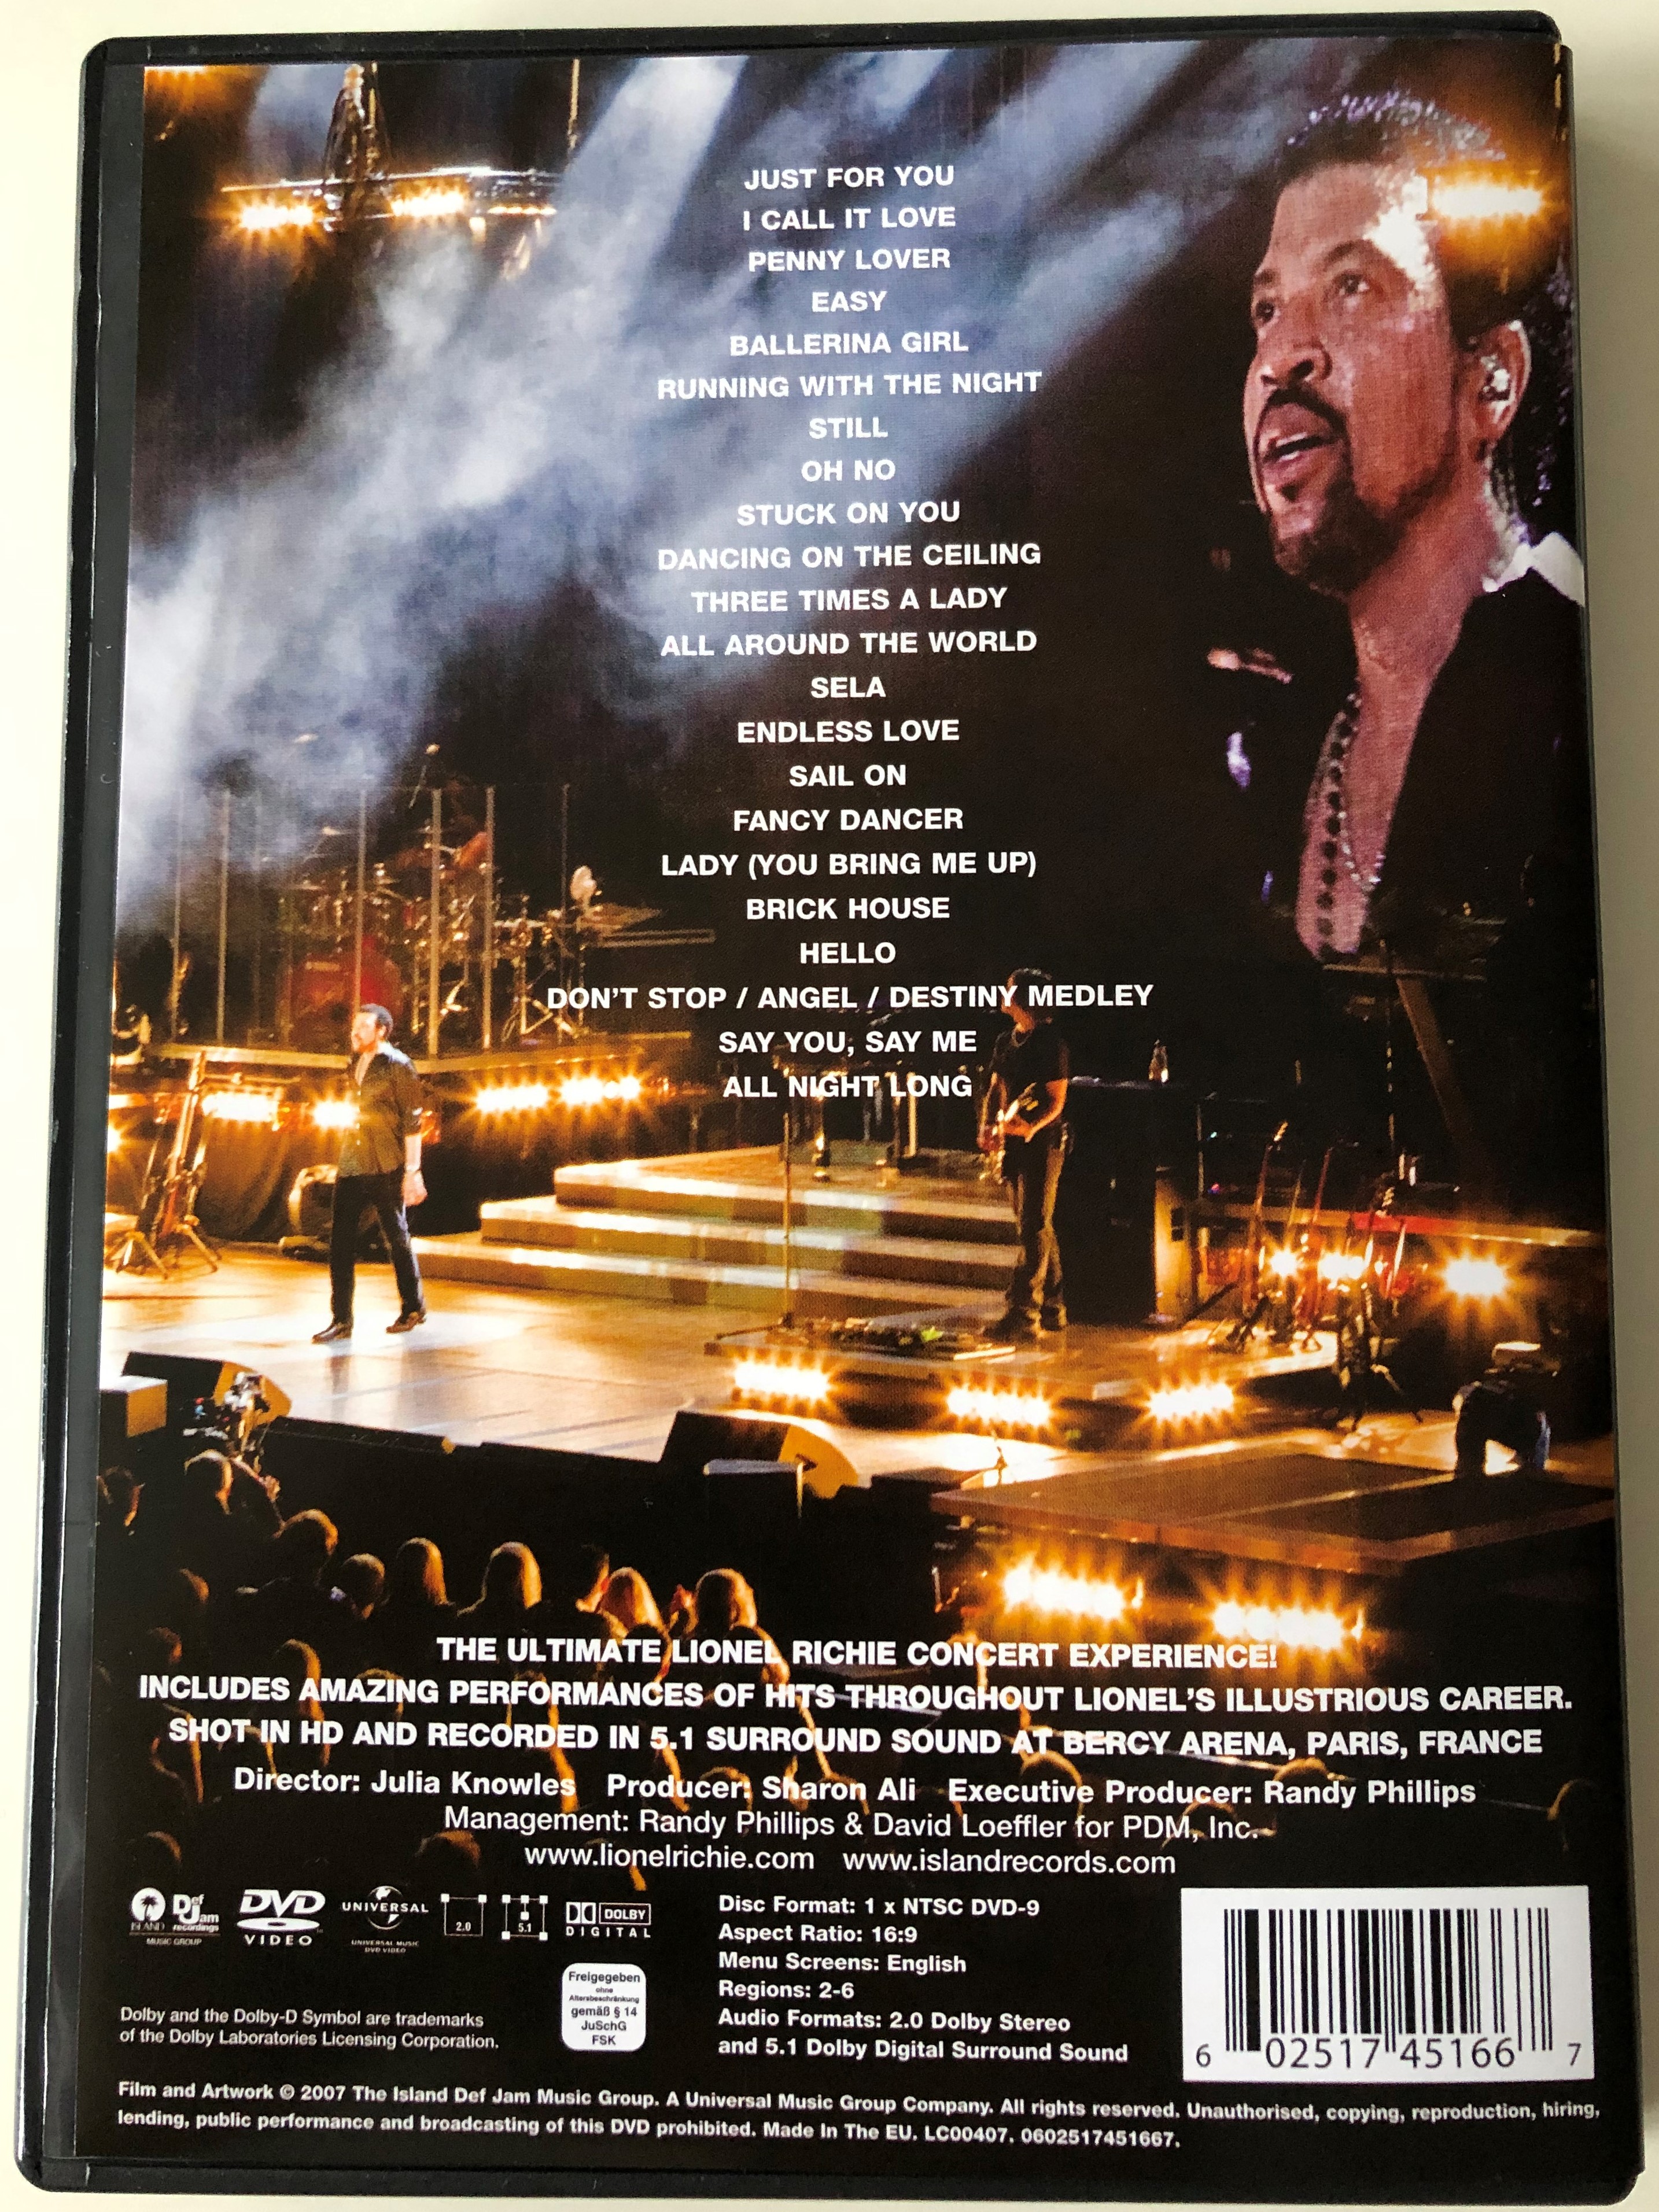 lionel-richie-live-dvd-his-greatest-hits-and-more-3.jpg